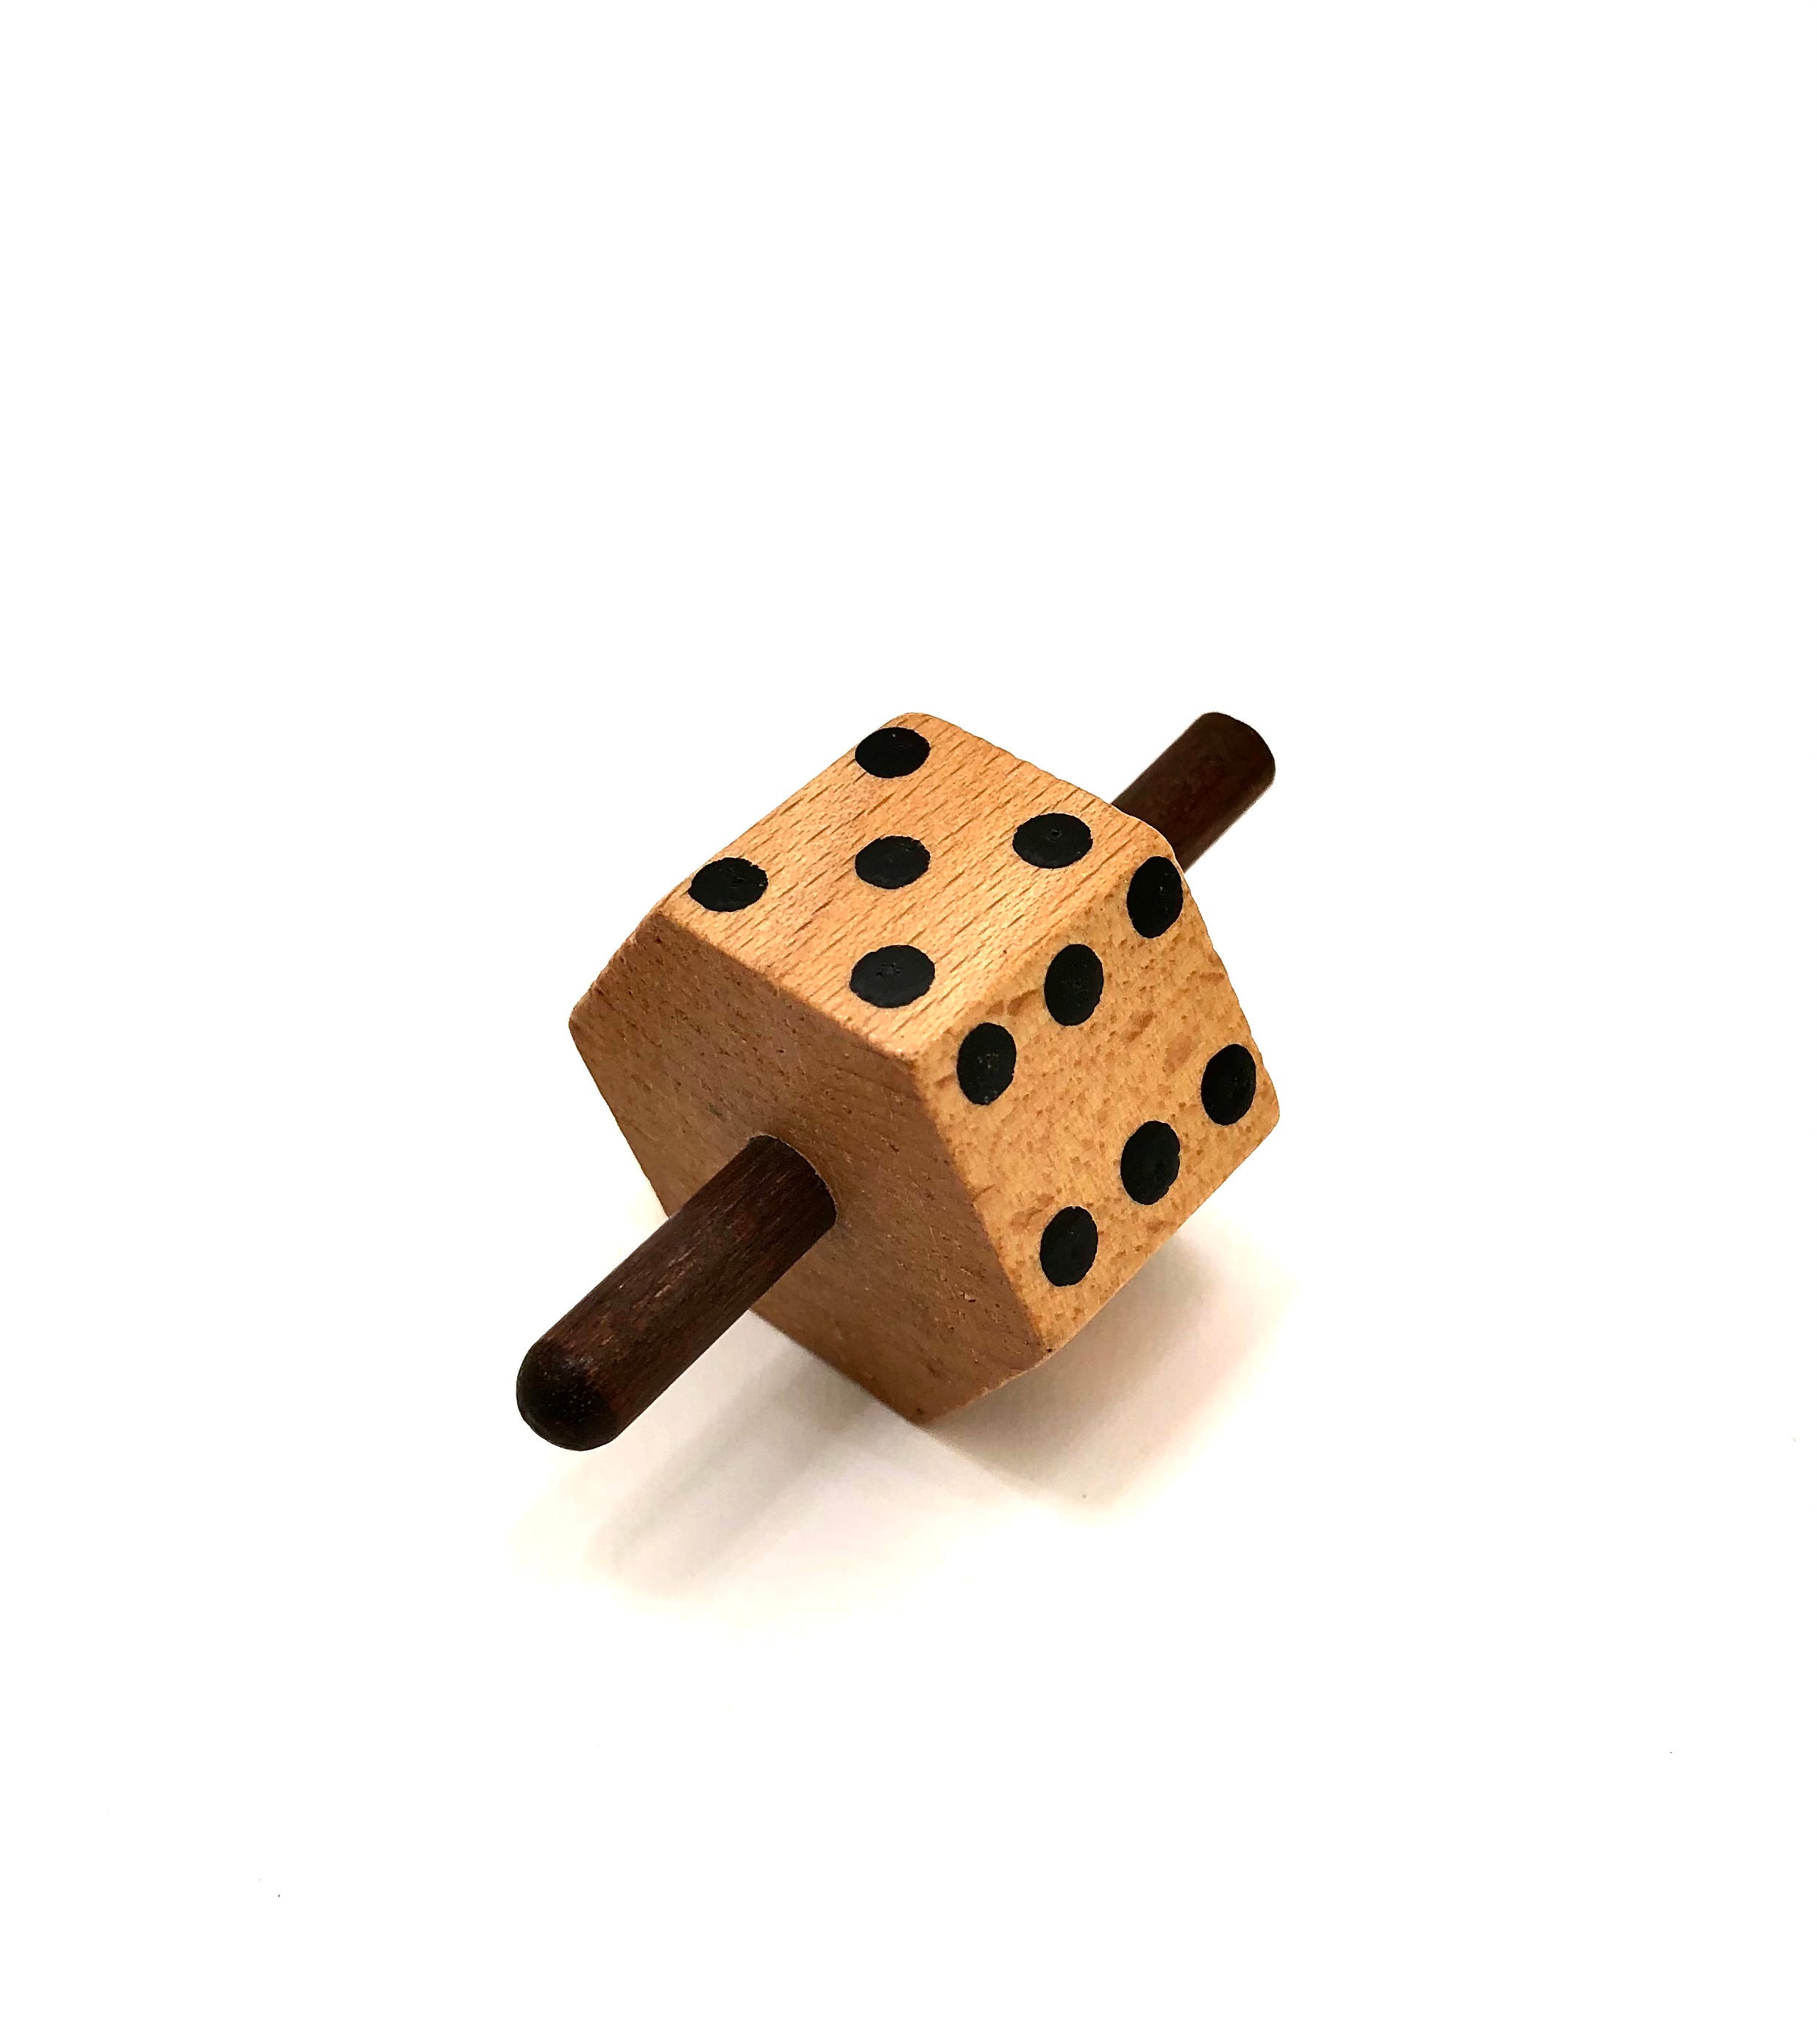 Vintage Japanese Wood Six Sided Dice Spinner with Pips | Vintage Gambling Koma